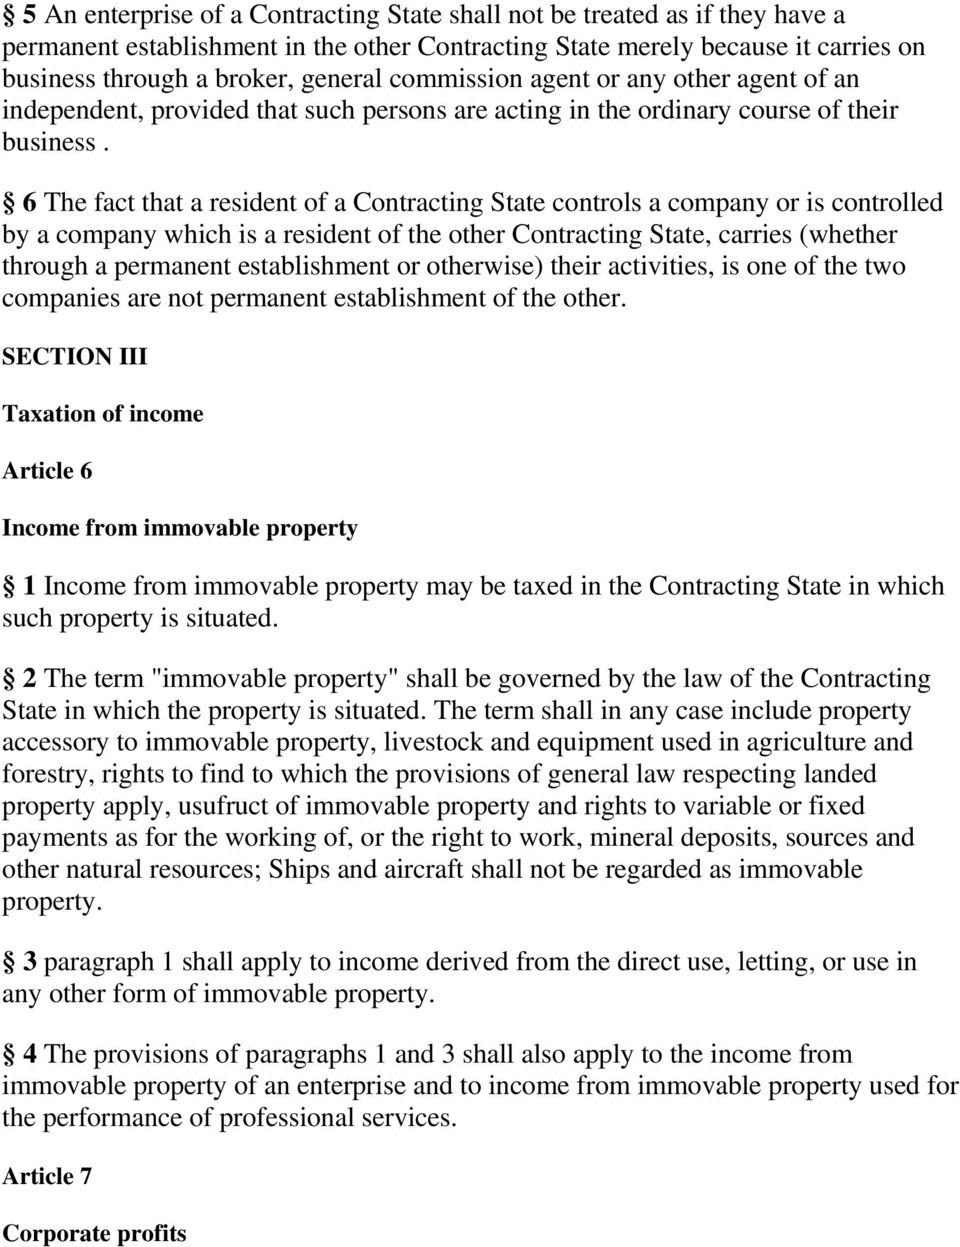 6 The fact that a resident of a Contracting State controls a company or is controlled by a company which is a resident of the other Contracting State, carries (whether through a permanent